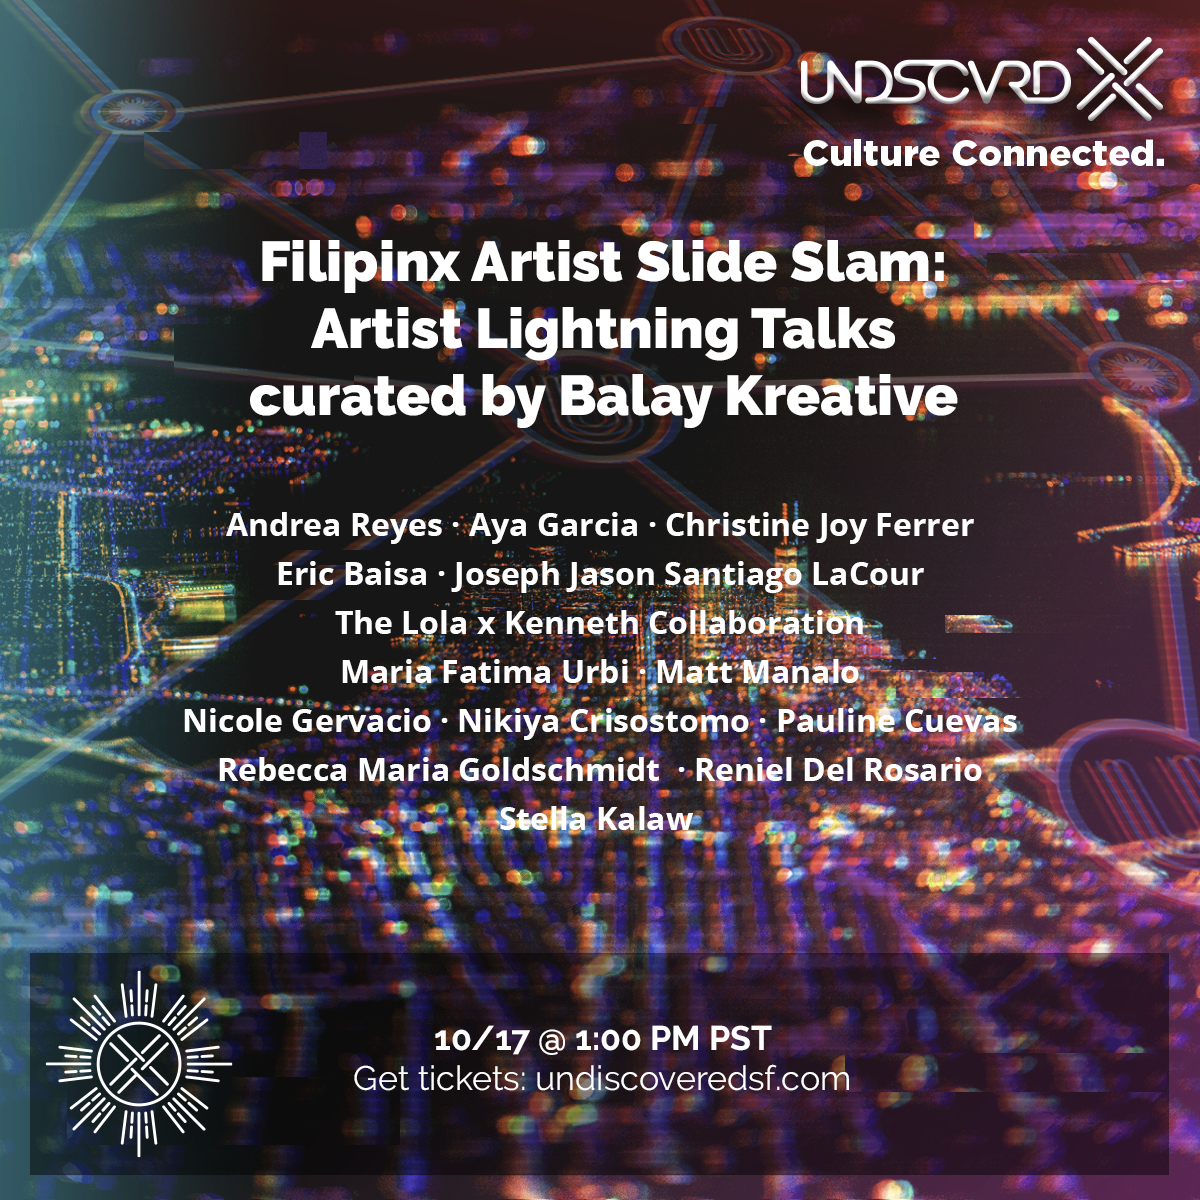 Balay Kreative sessions curated at UNDISCOVERED X! — Balay Kreative